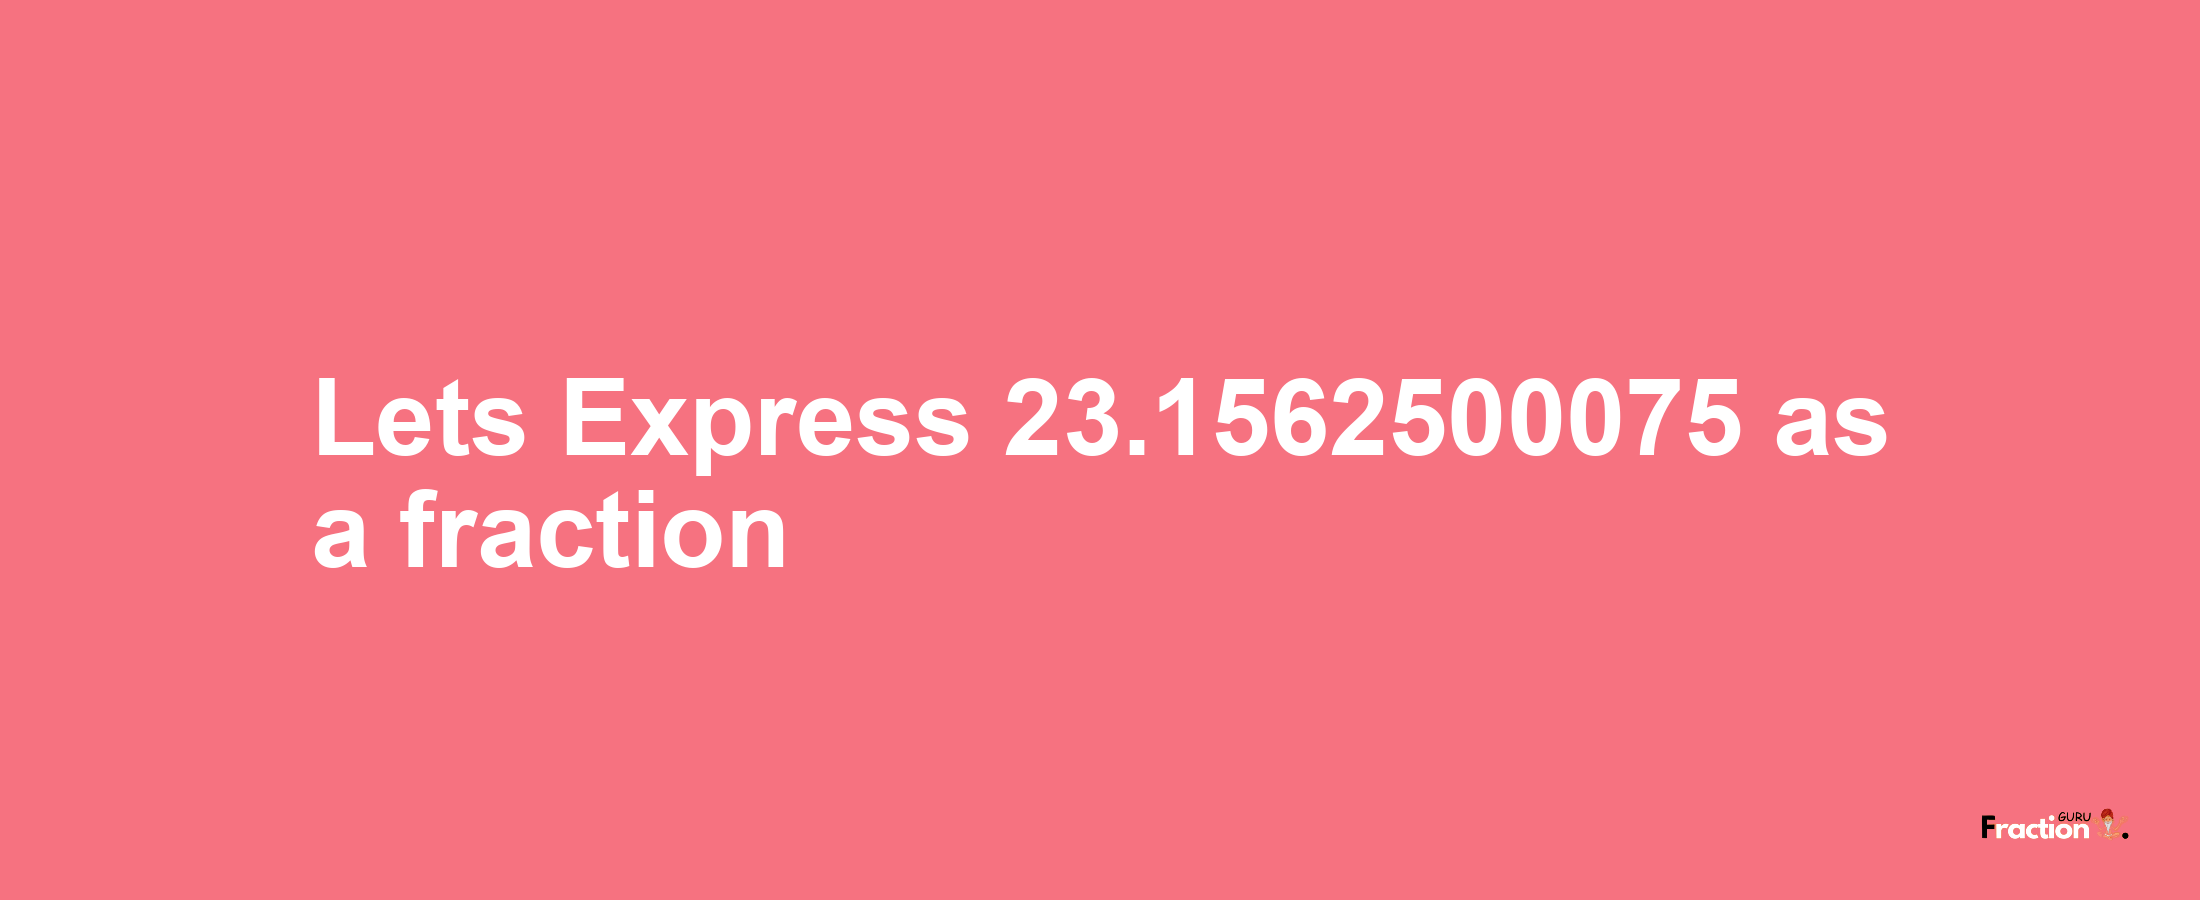 Lets Express 23.1562500075 as afraction